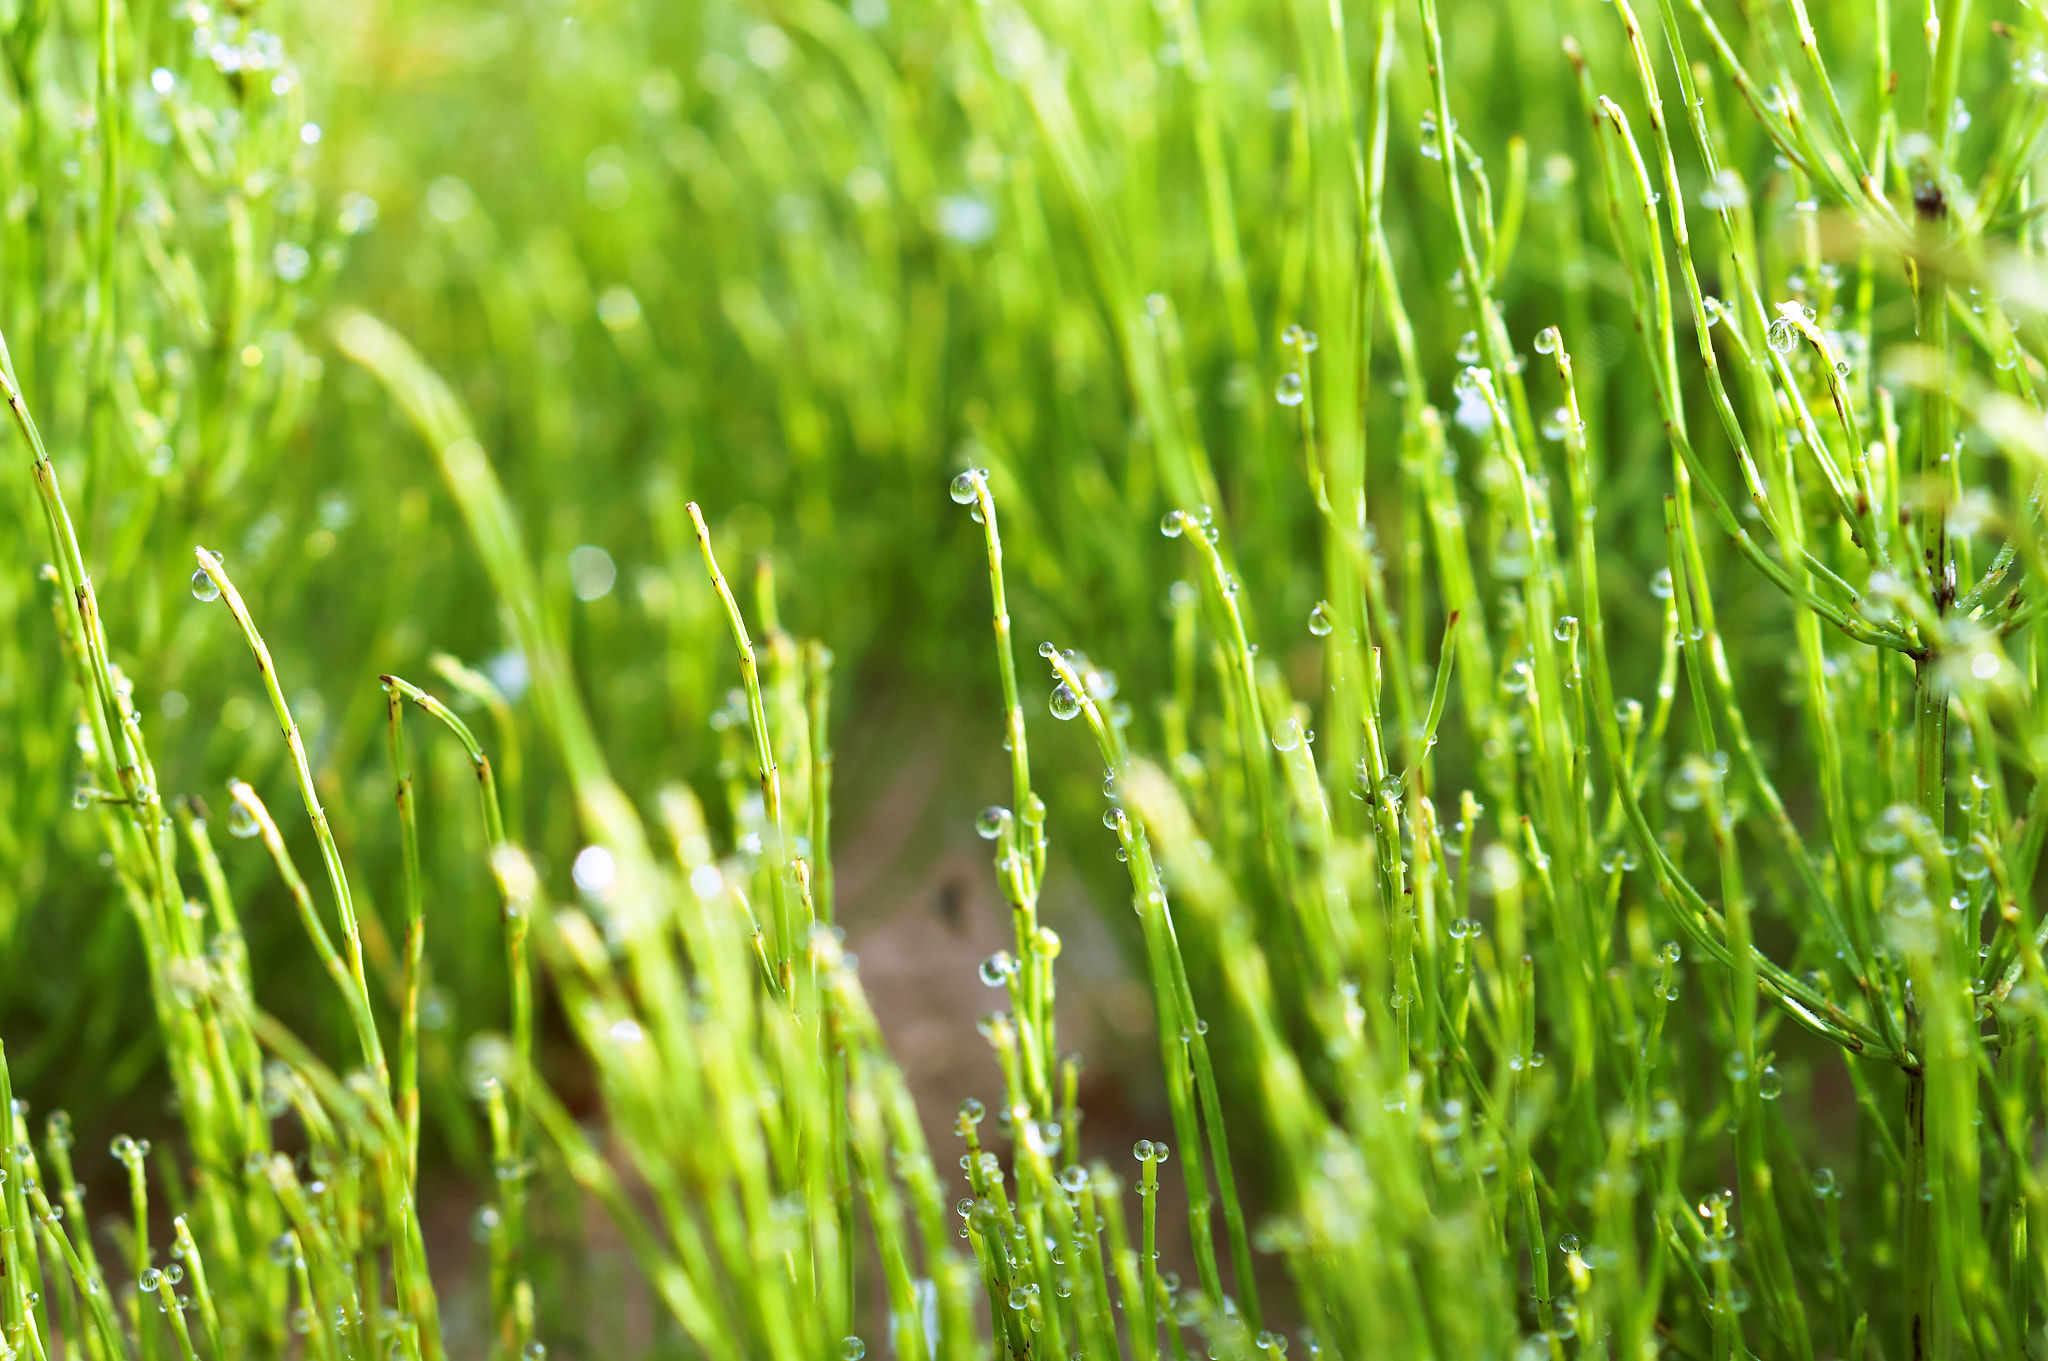 Sony Alpha NEX-3N sample photo. Equisetum stems close-up, dew drops on green equisetum, green grass stems and water drops photography